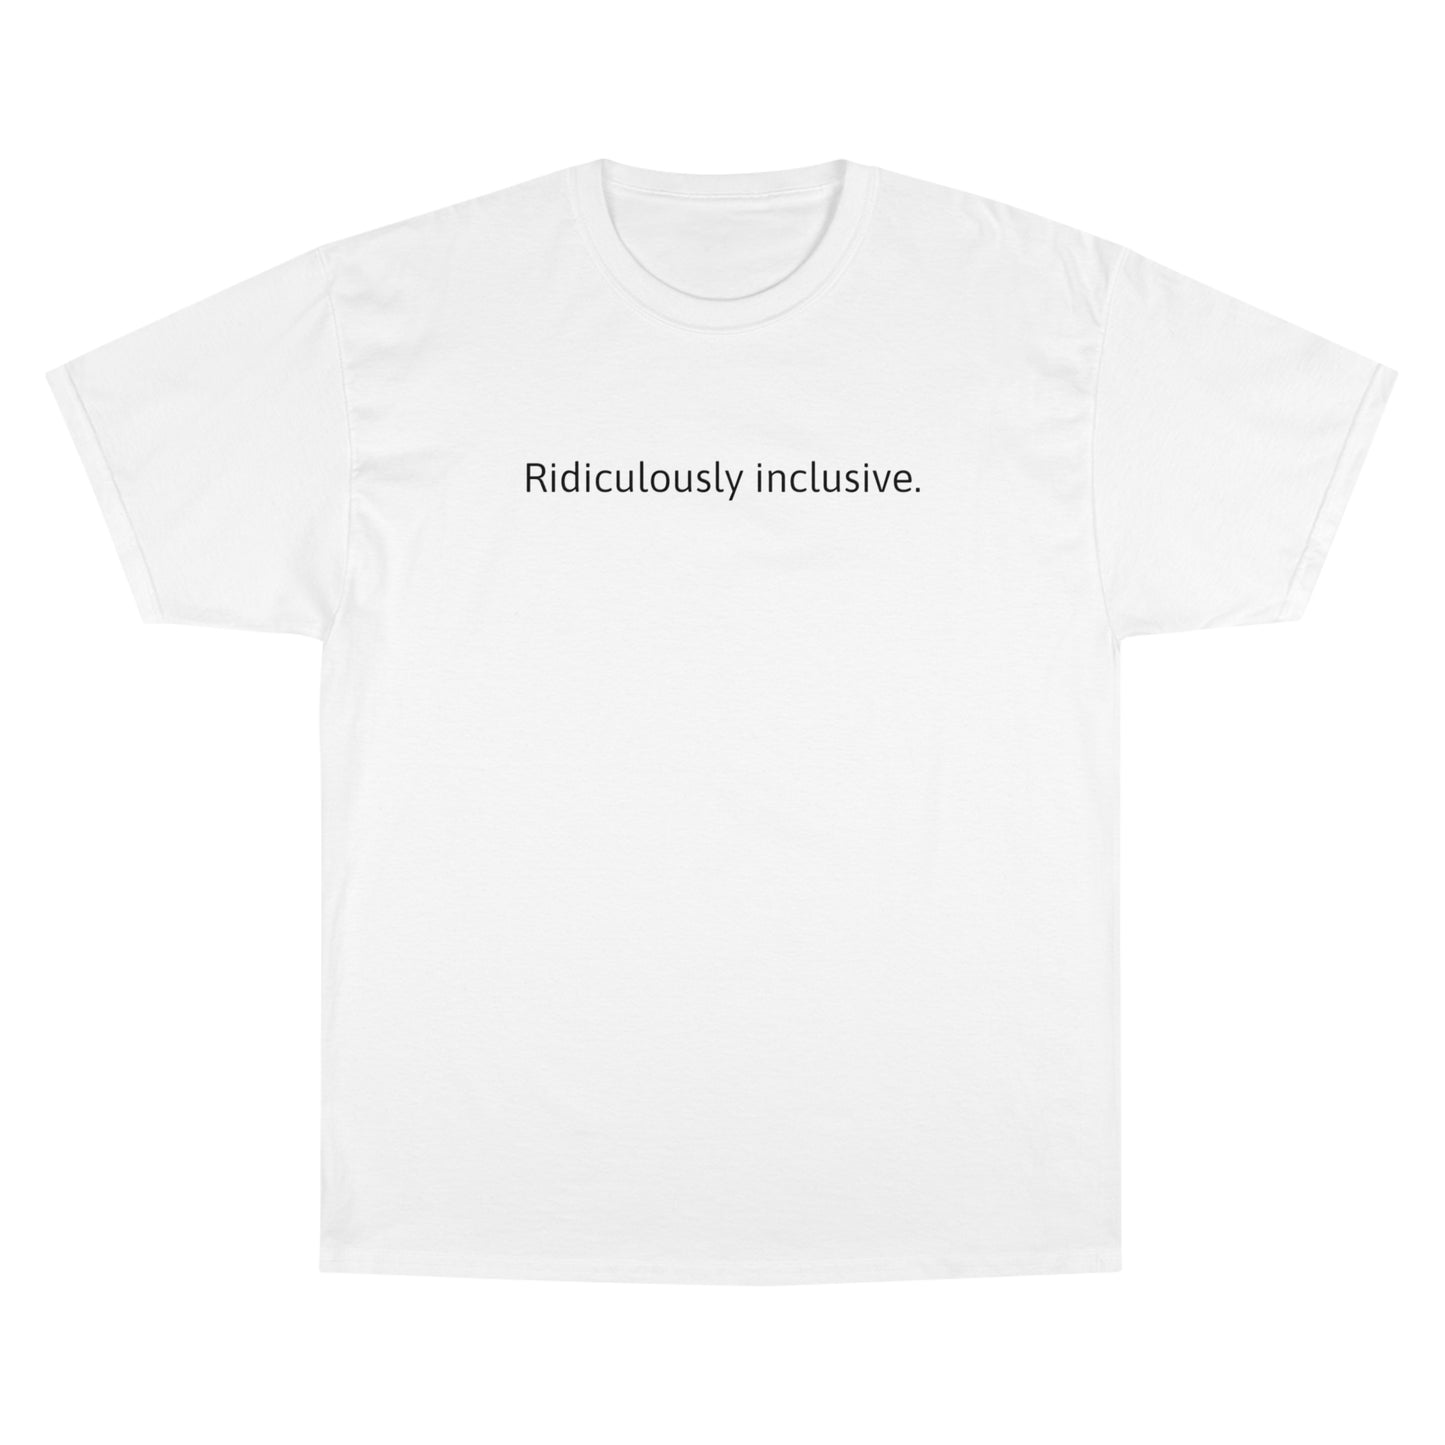 Ridiculously inclusive. T-Shirt